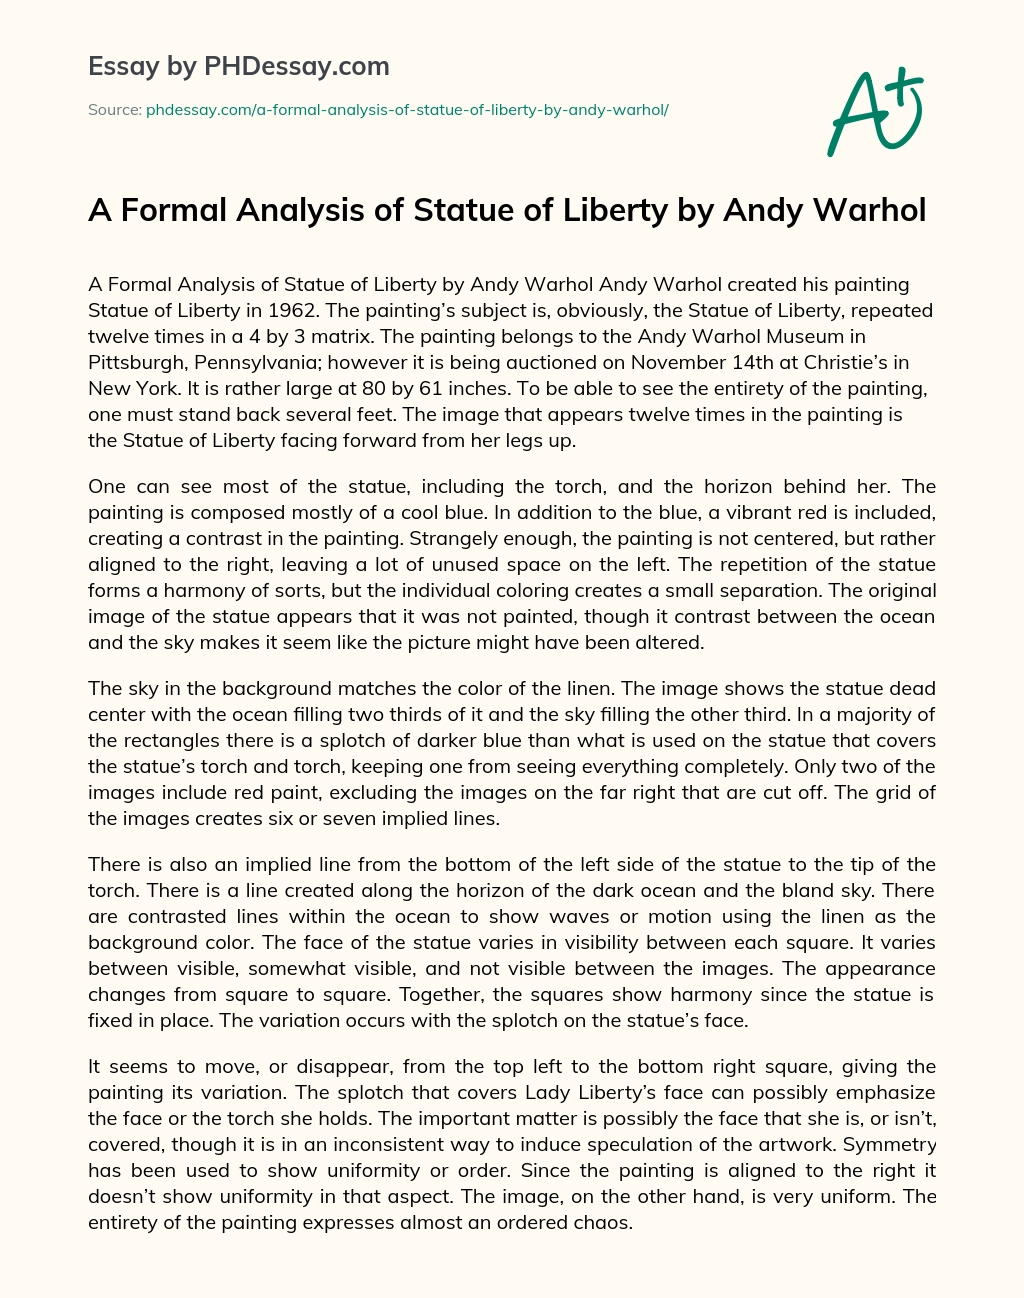 A Formal Analysis of Statue of Liberty by Andy Warhol essay